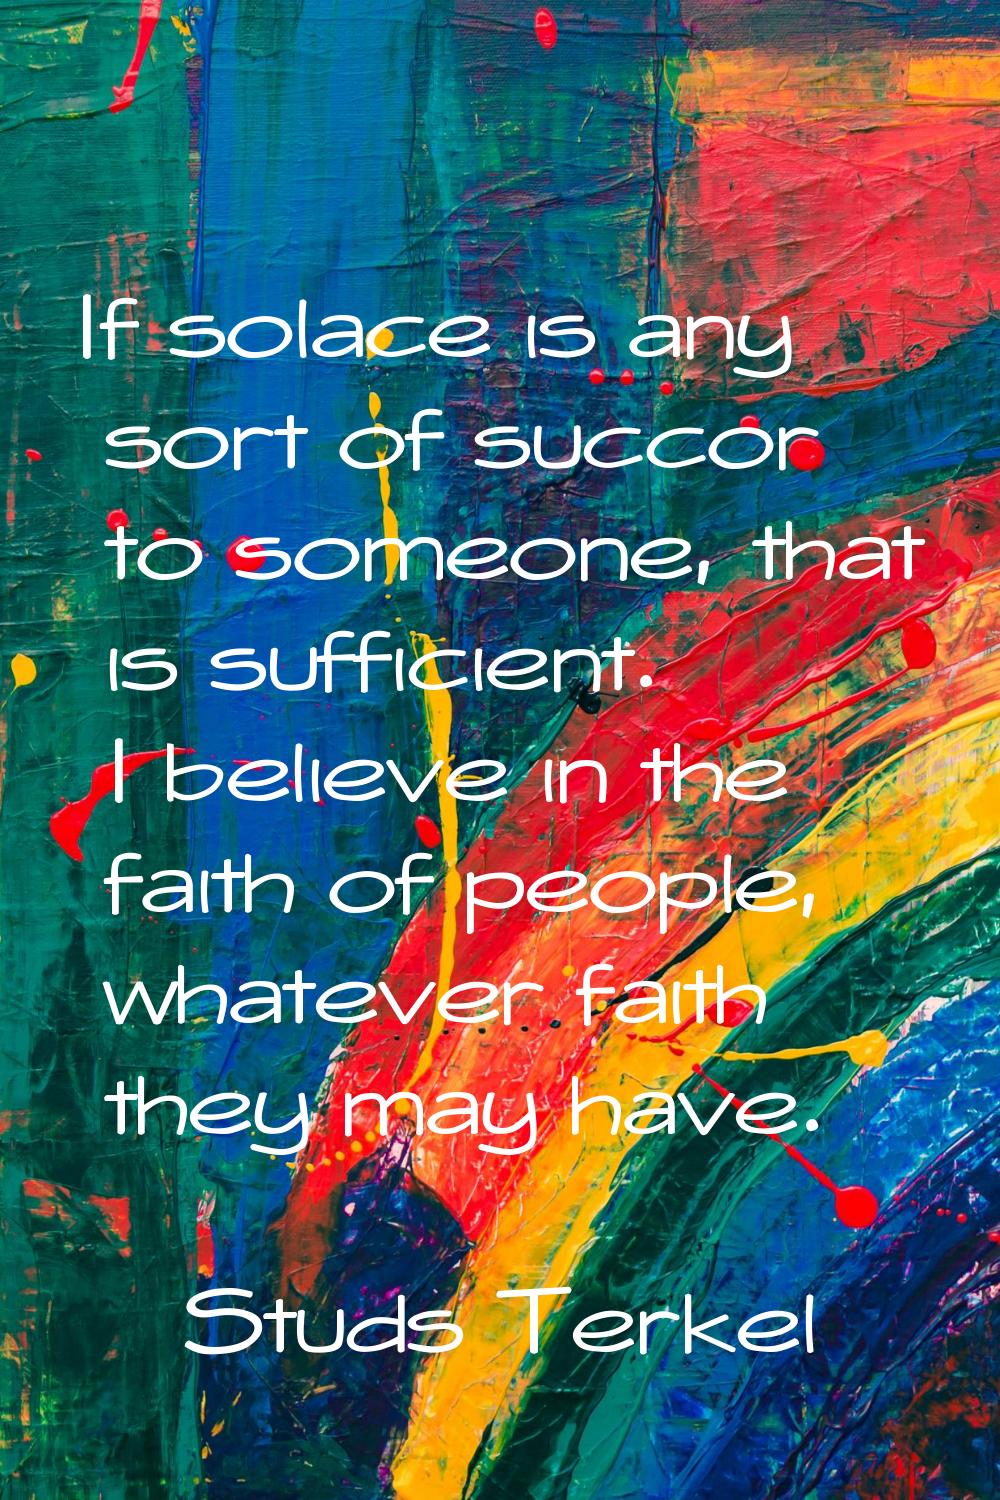 If solace is any sort of succor to someone, that is sufficient. I believe in the faith of people, w